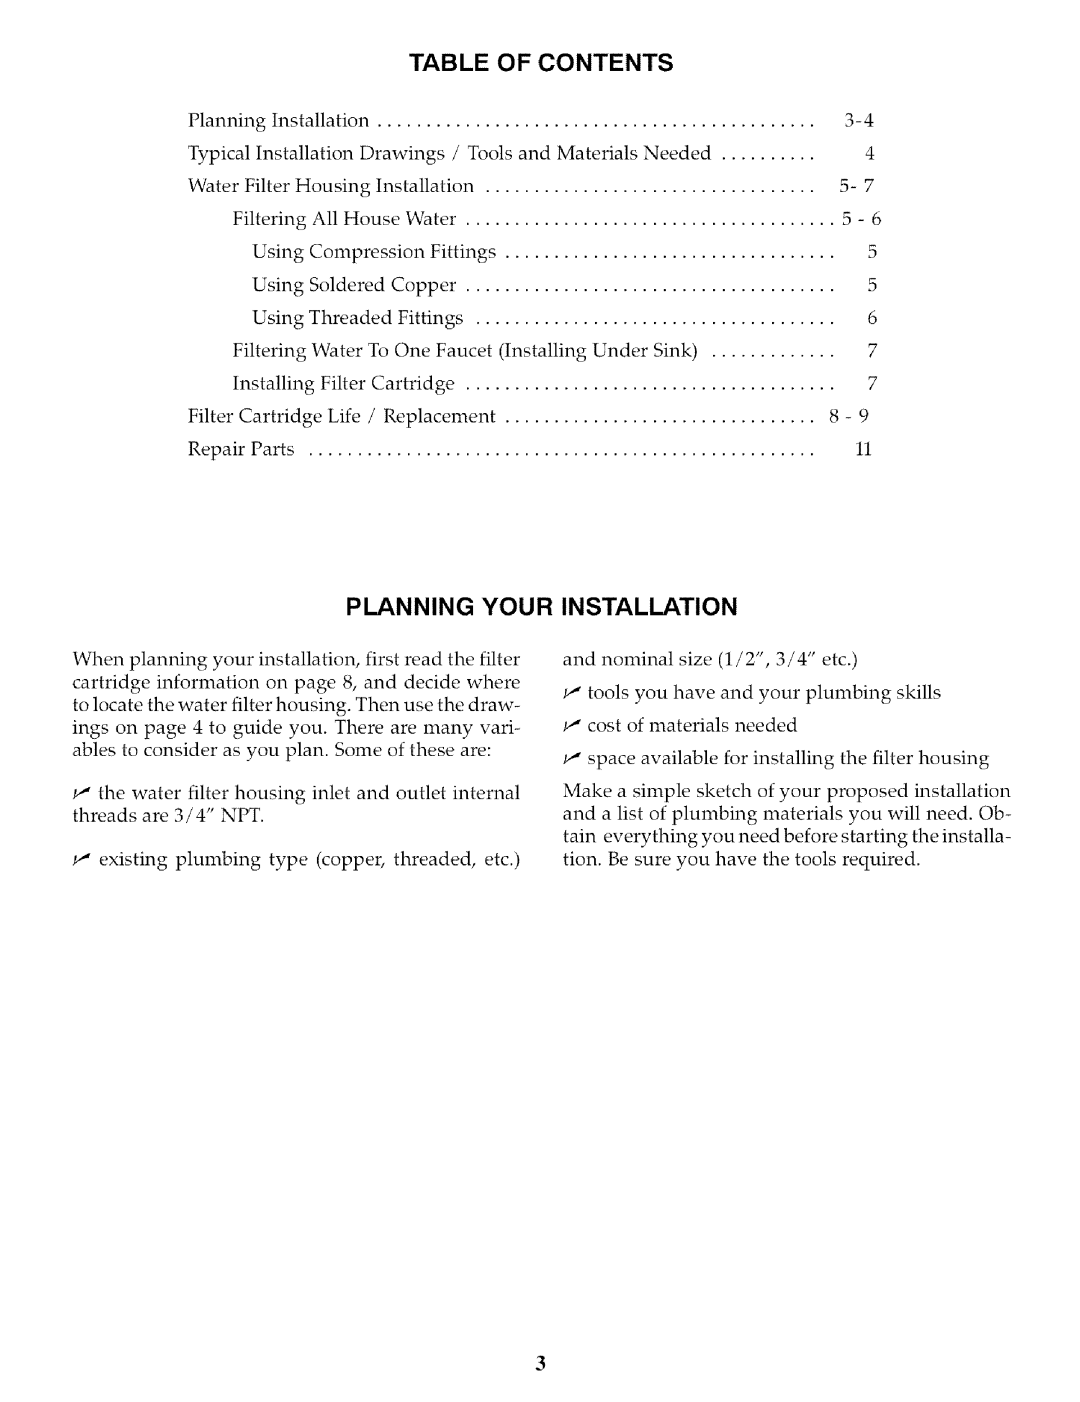 Kenmore 625.3844 owner manual Planning, Your, Installation, Table Of Contents 